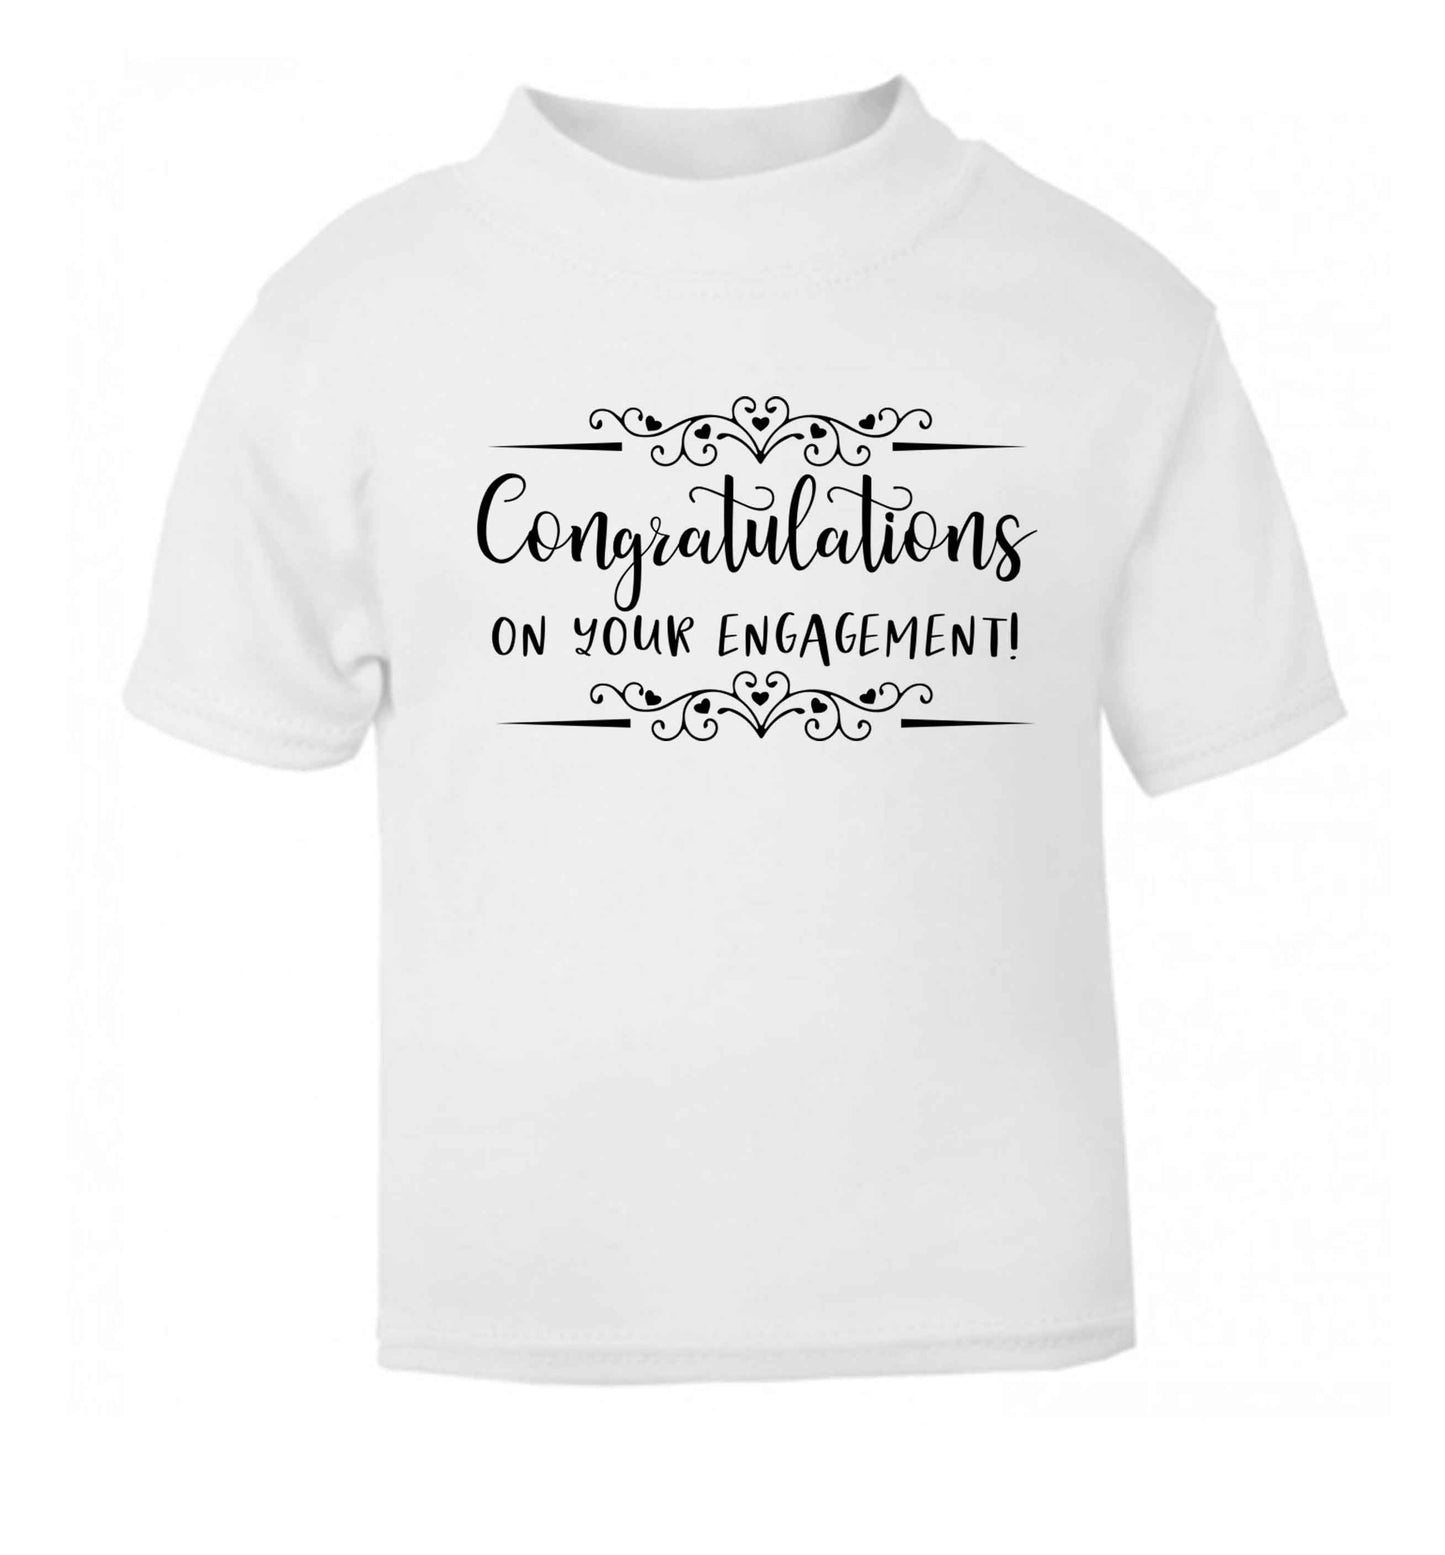 Congratulations on your engagement white baby toddler Tshirt 2 Years